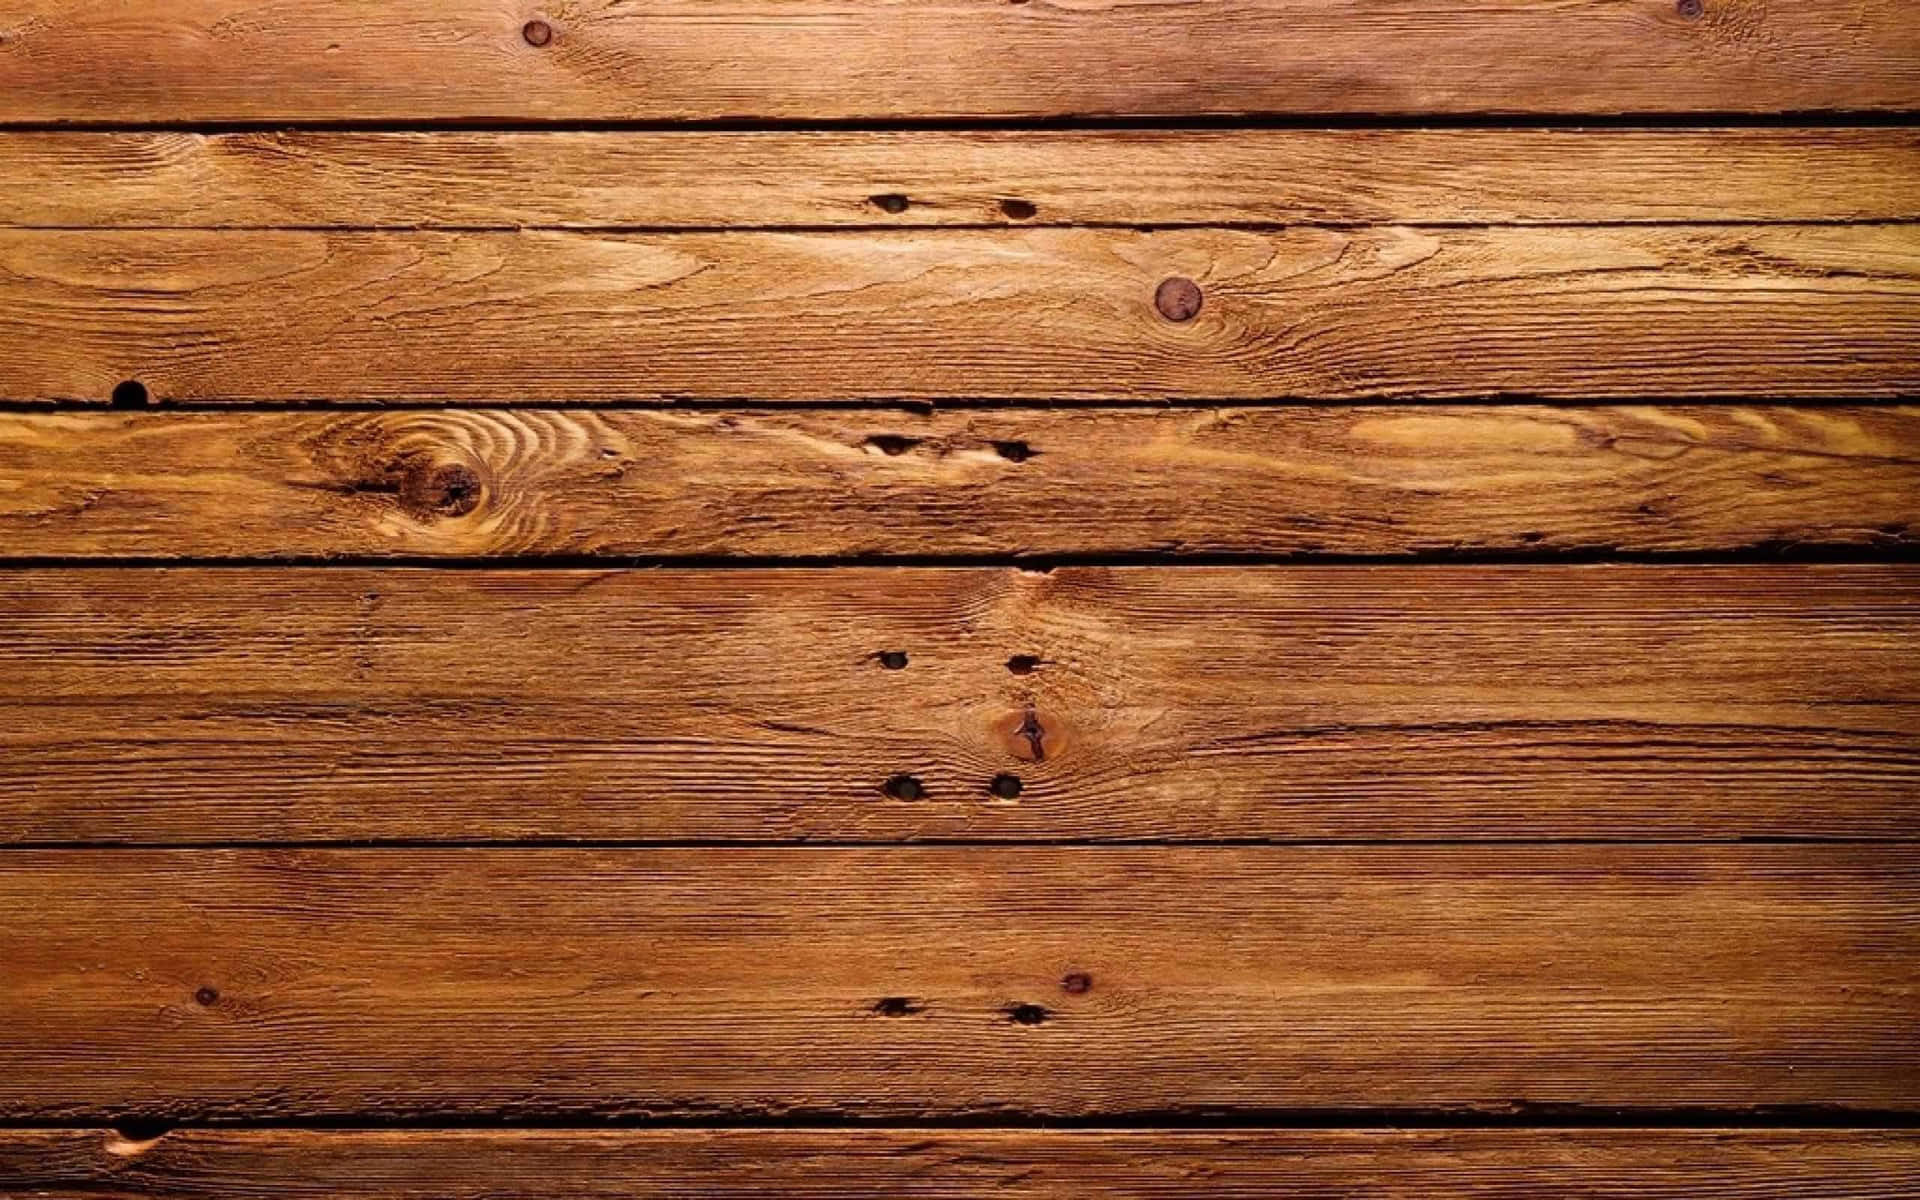 Rustic Wood Background Wooden Surface With Holes